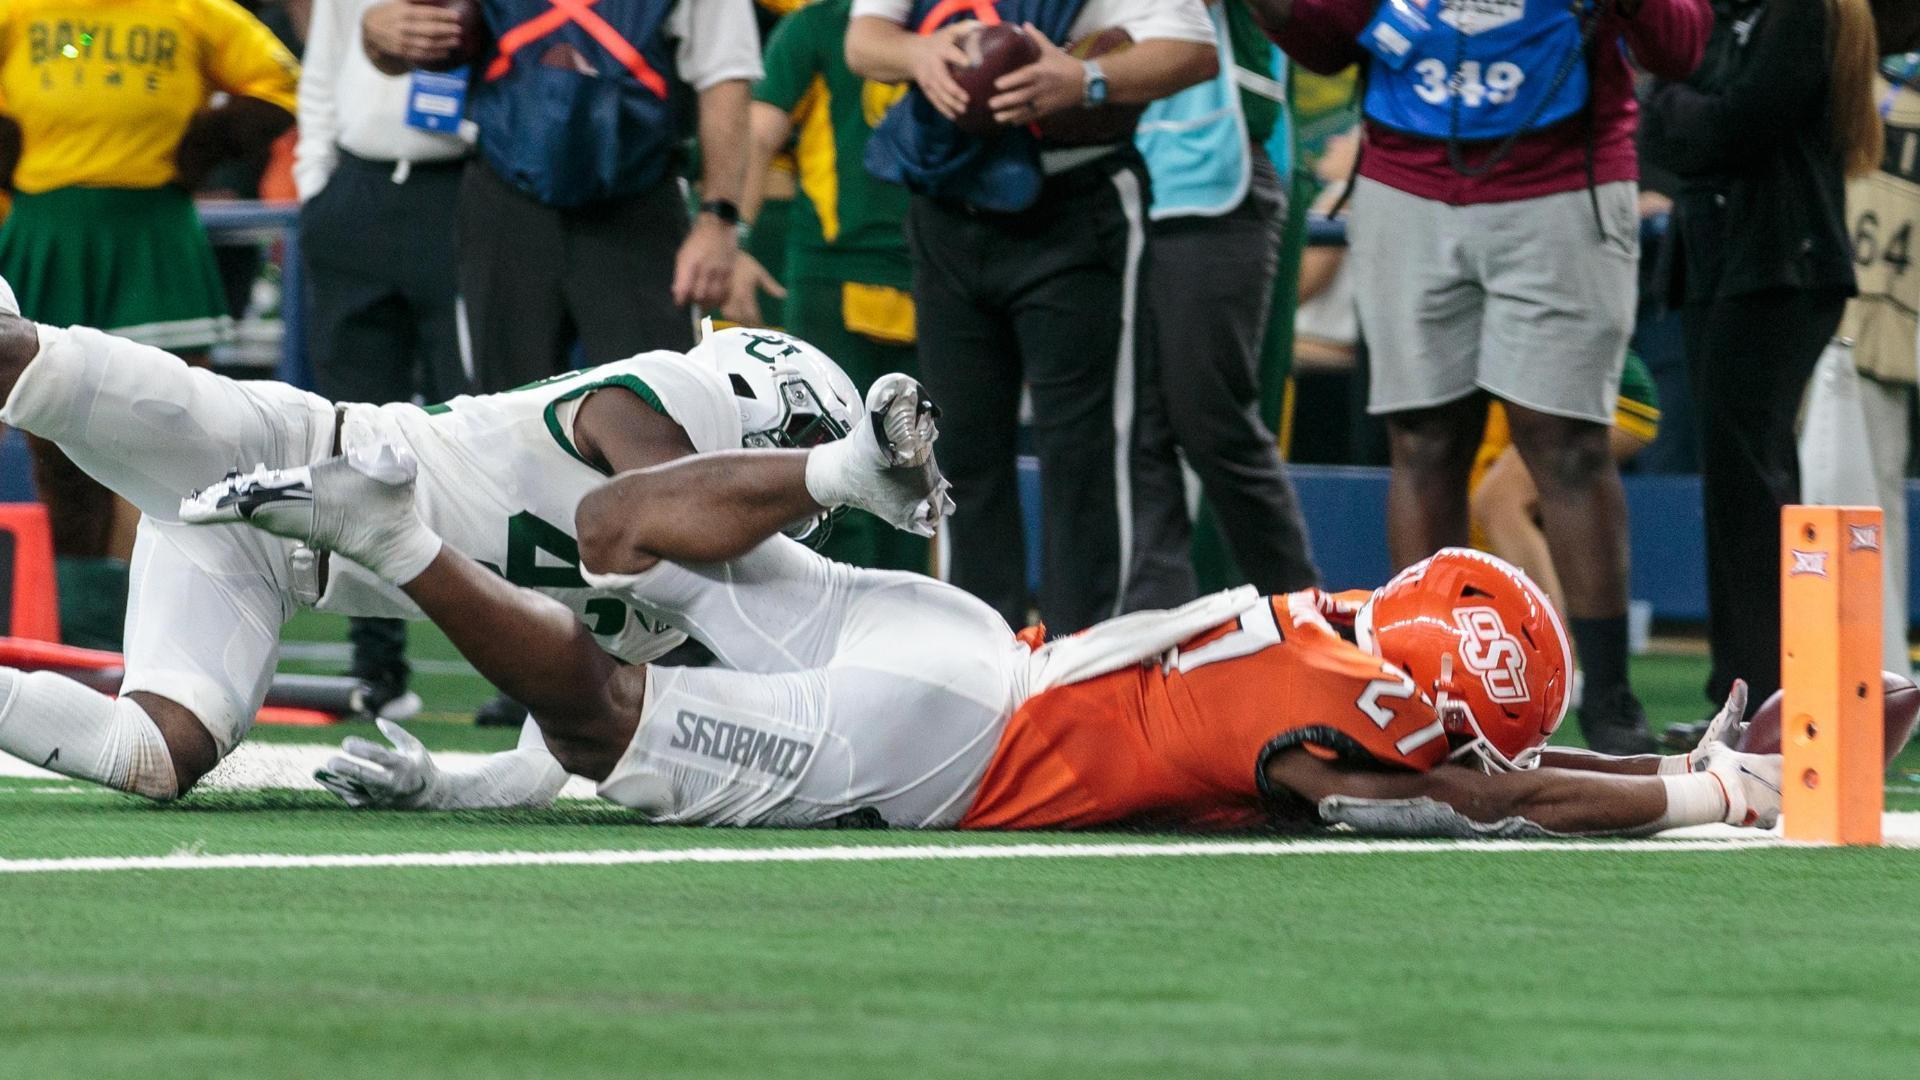 Baylor overcomes late PI call, stands strong at goal line to win Big 12